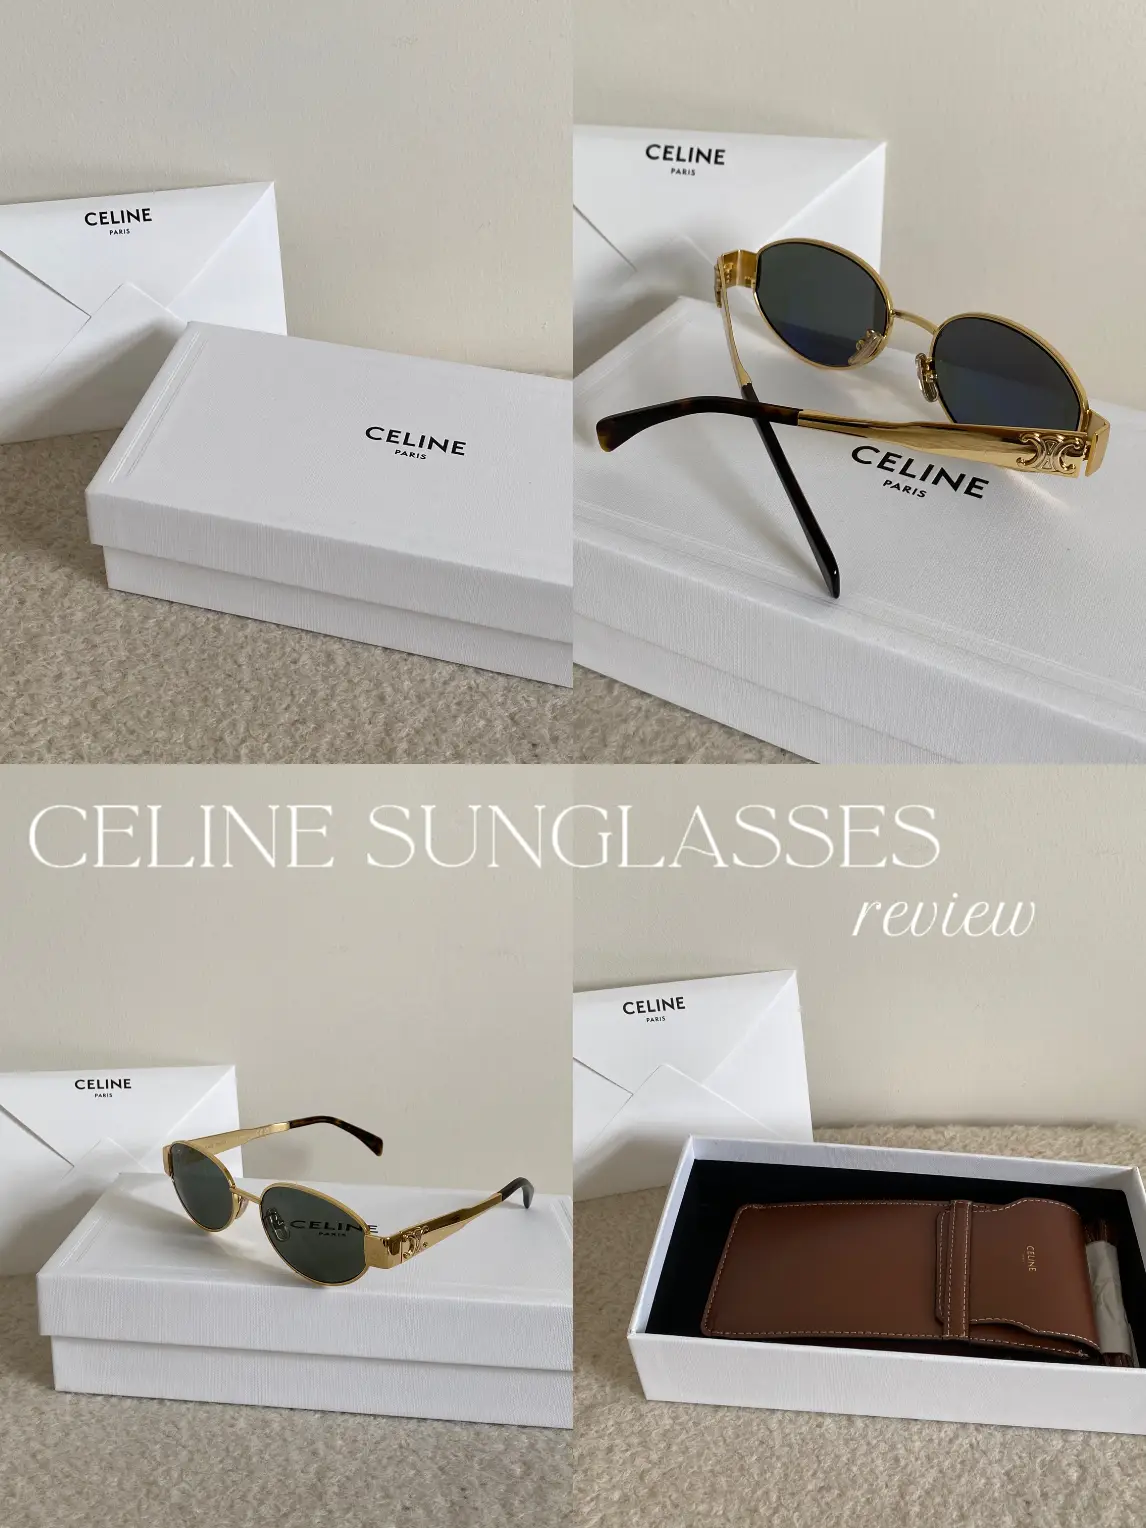 LOUIS VUITTON UNBOXING SQUARE SUNGLASSES TRY ON & REVIEW